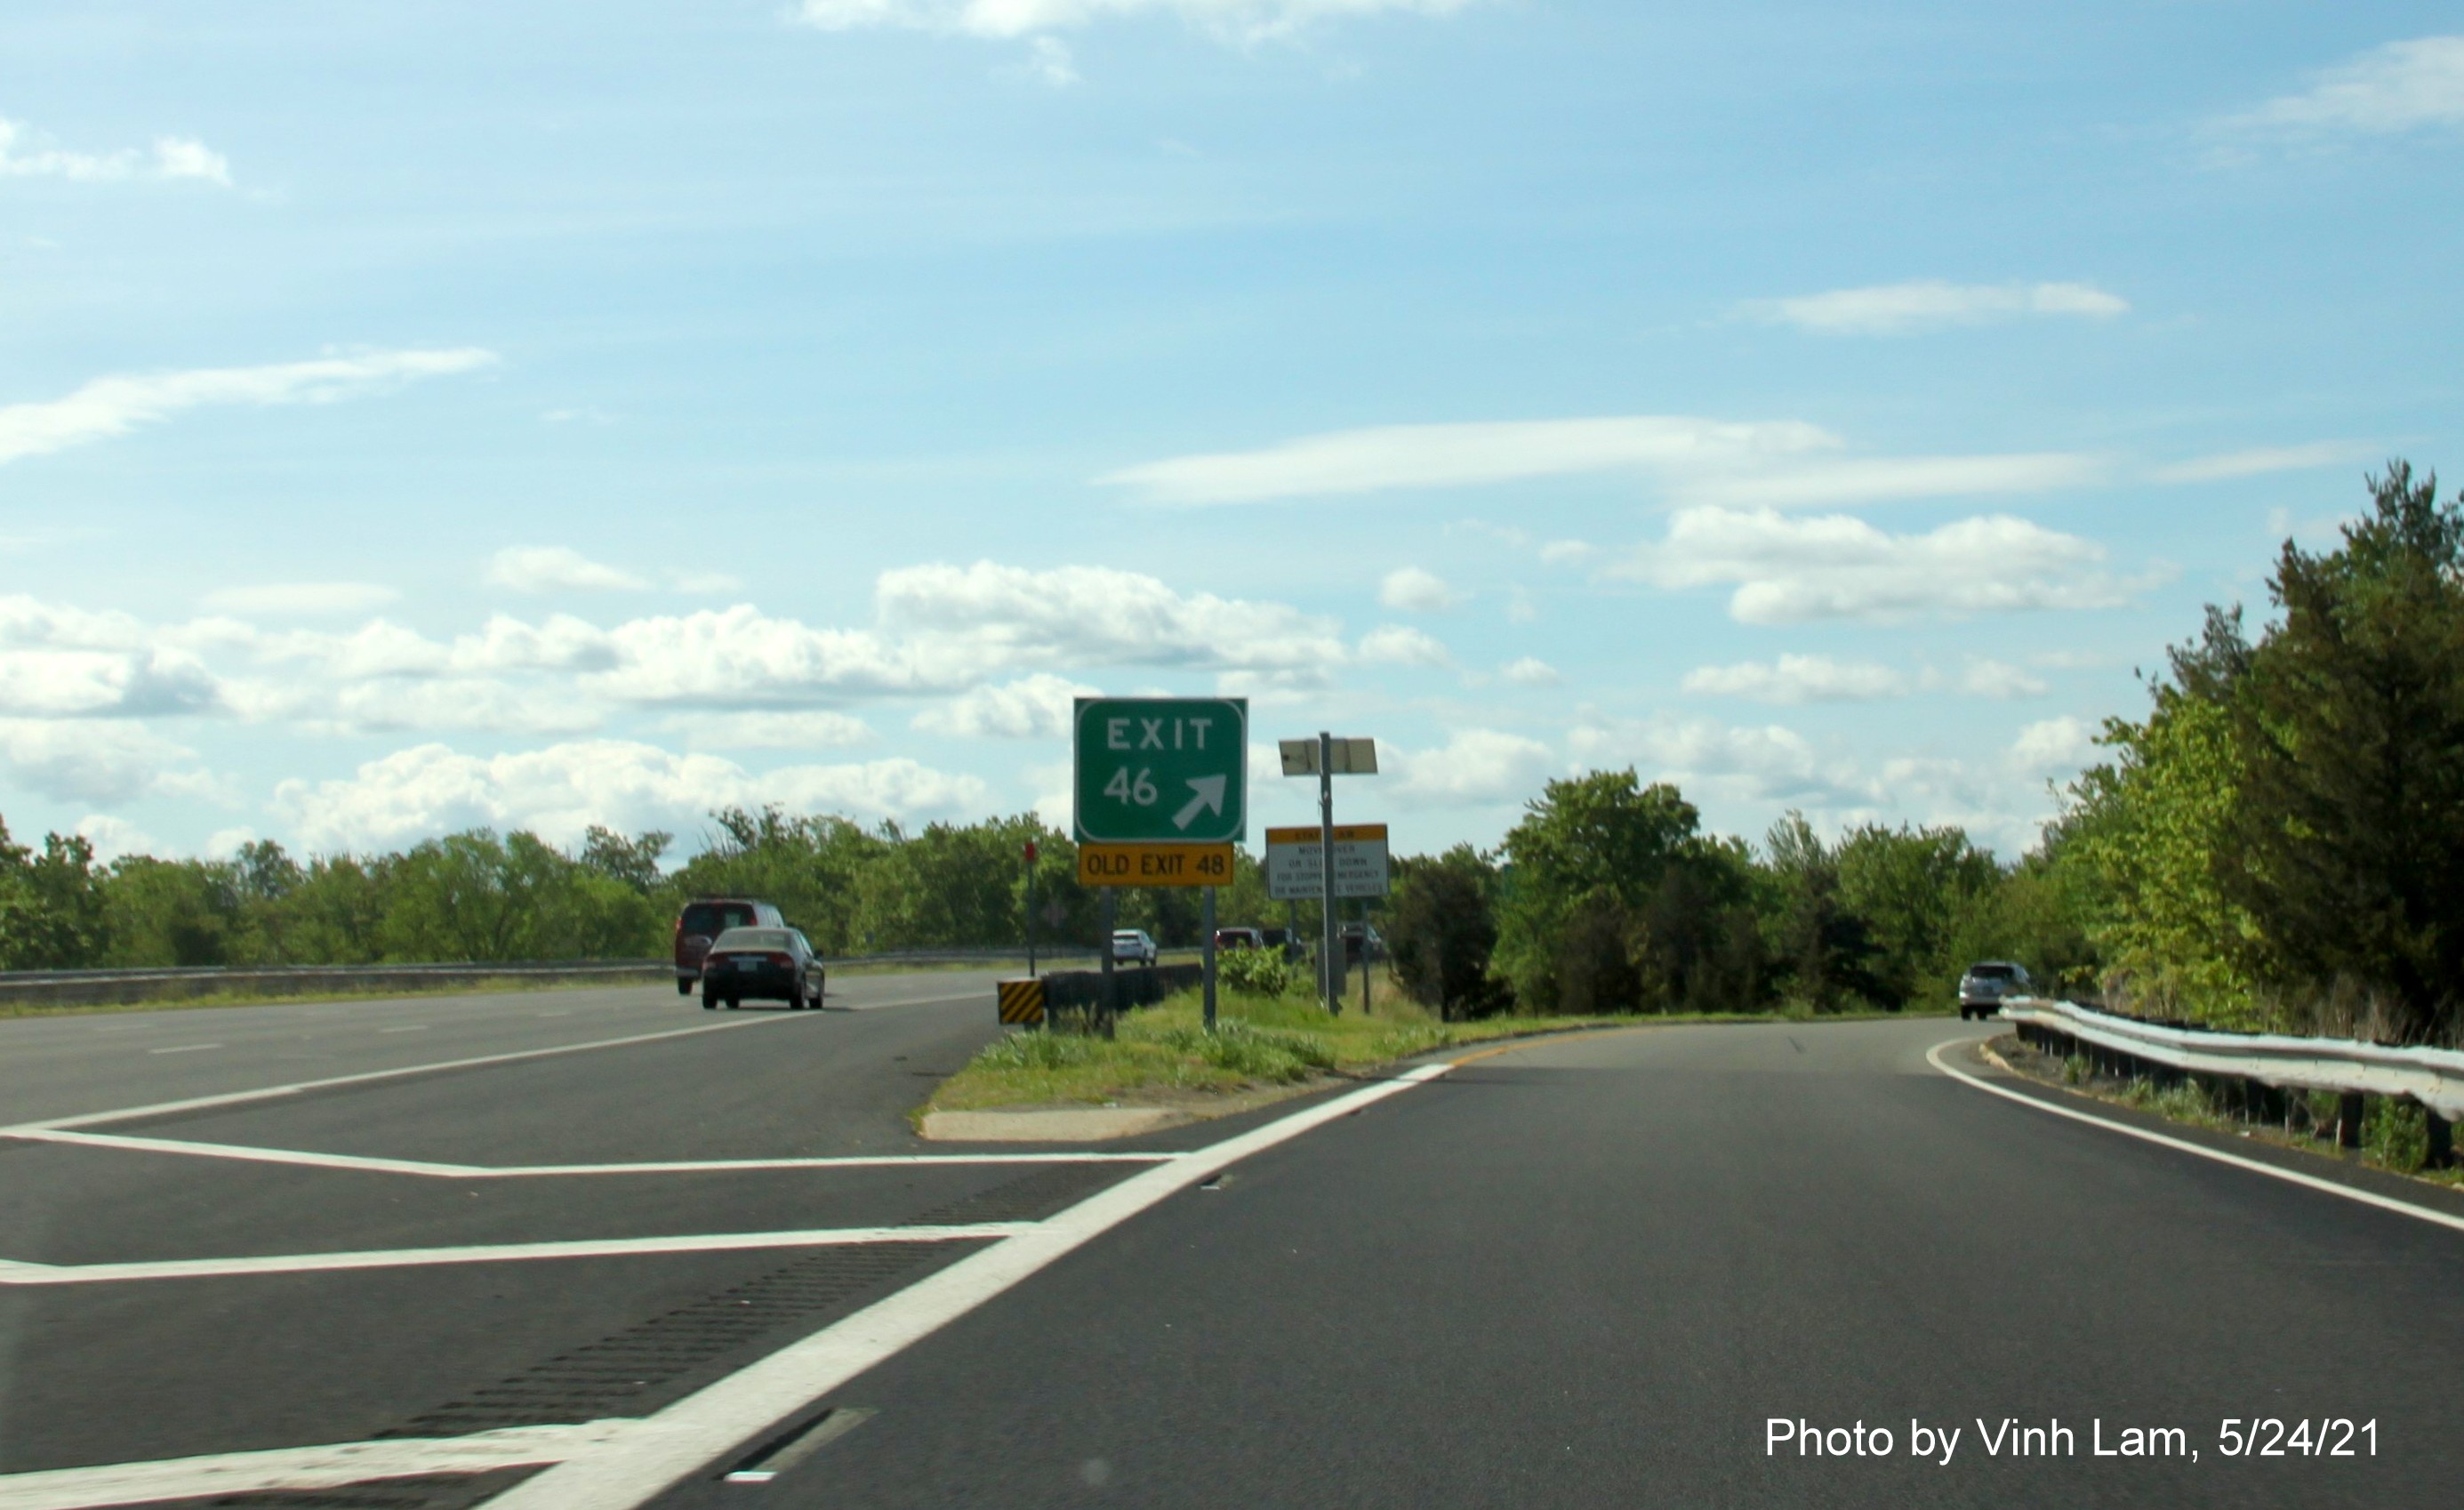 Image of gore sign for MA 213 exit with new milepost based exit number and yellow Old Exit 48 advisory sign attached below on I-93 South in Methuen, by Vinh Lam, May 2021